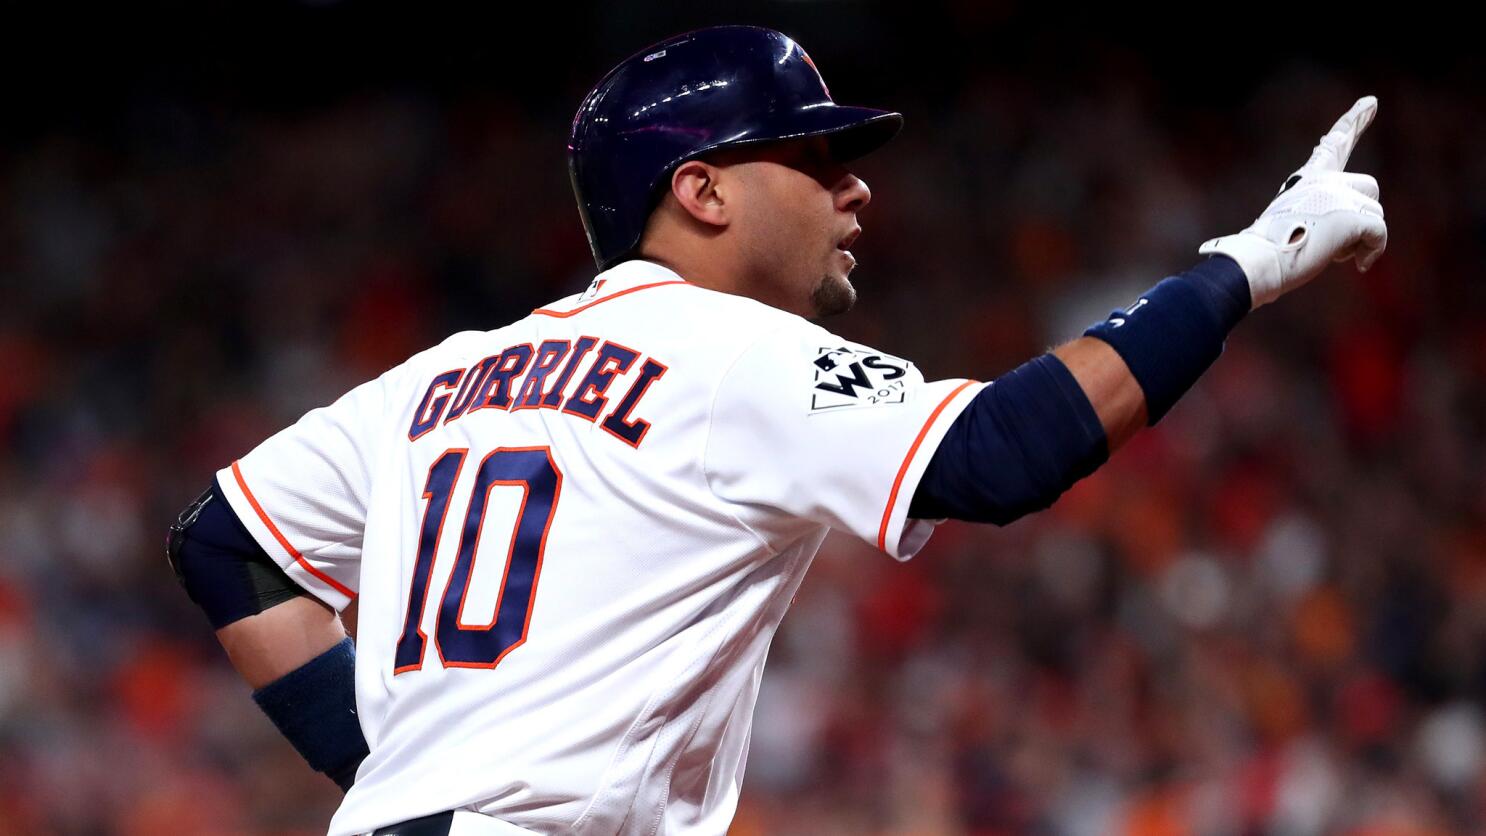 MLB should have suspended Gurriel during series